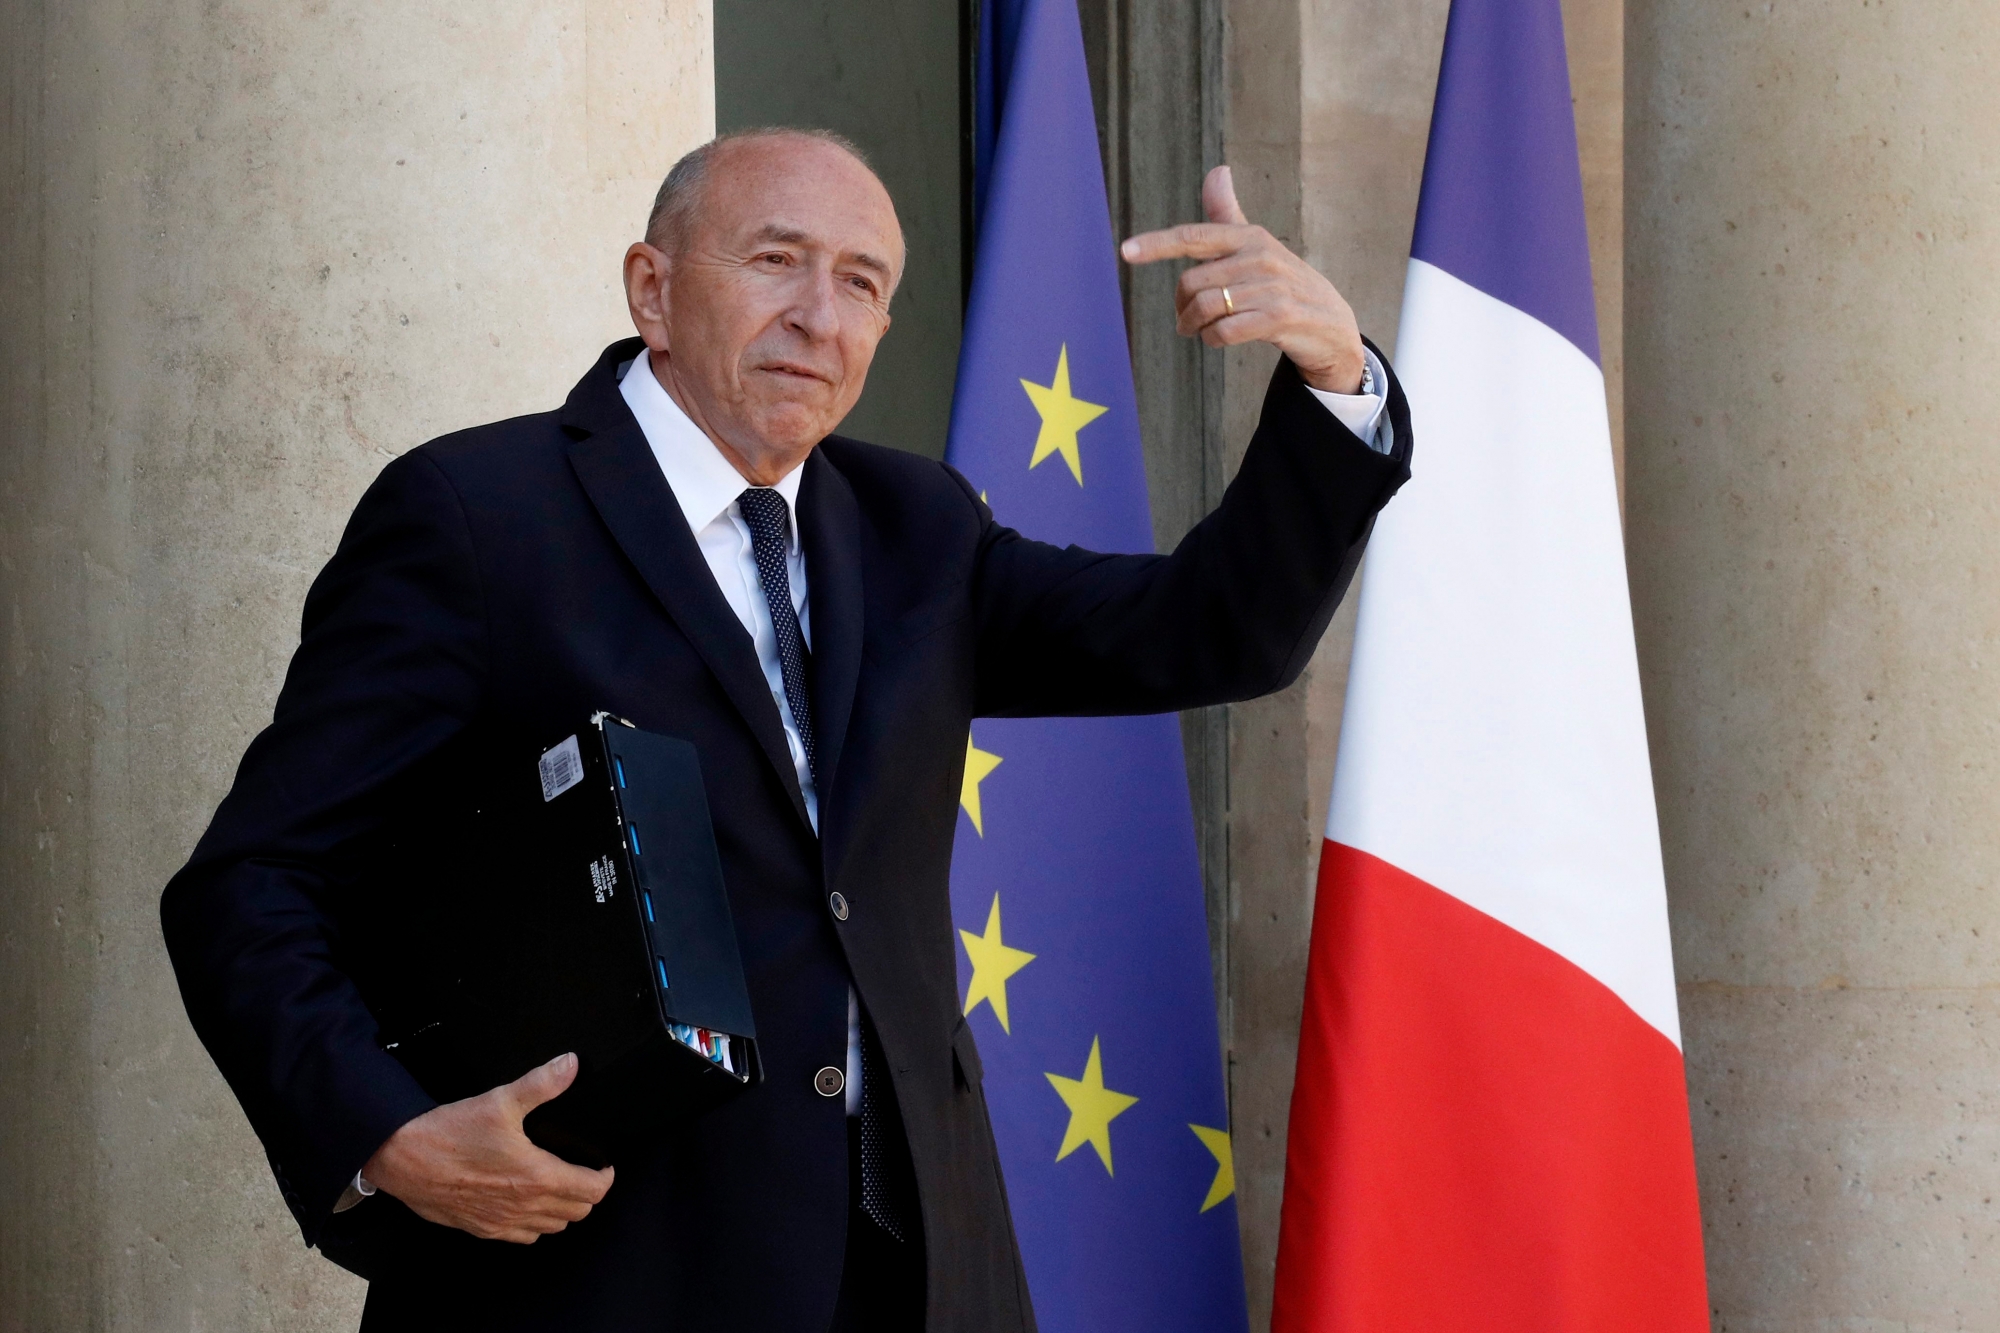 epa07065682 (FILE) French Interior Minister Gerard Collomb leaves the Elysee palace following the weekly cabinet meeting in Paris, France, 03 August 2018 (reissued 03 October 2018). French President Emmanuel Macron accepted the resignation of the interior minister Gerard Collomb on 03 October 2018 and asked Edouard Philippe, French Prime Minister, to assume the responsibilities in the interim.  EPA/YOAN VALAT (FILE) FRANCE INTERIOR MINISTER RESIGNATION